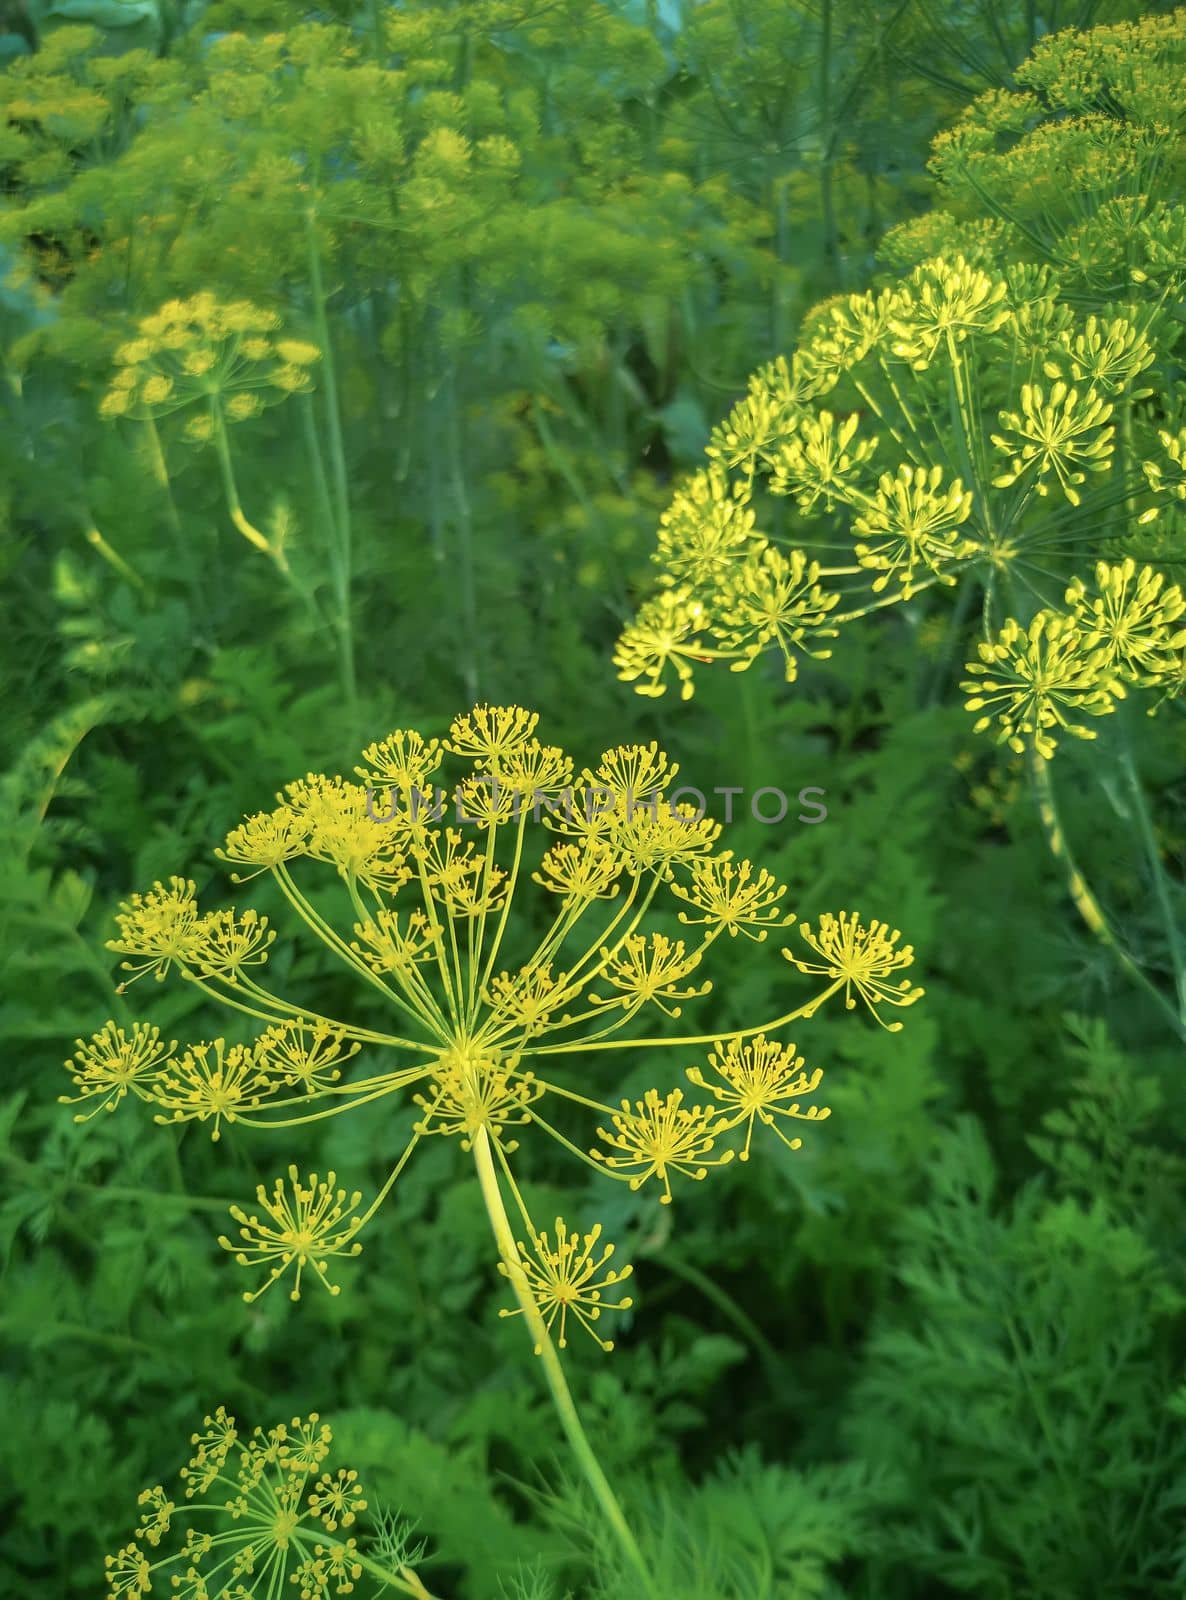 Sprigs of dill with inflorescences of seeds are covered with dew drops. Presented close-up.